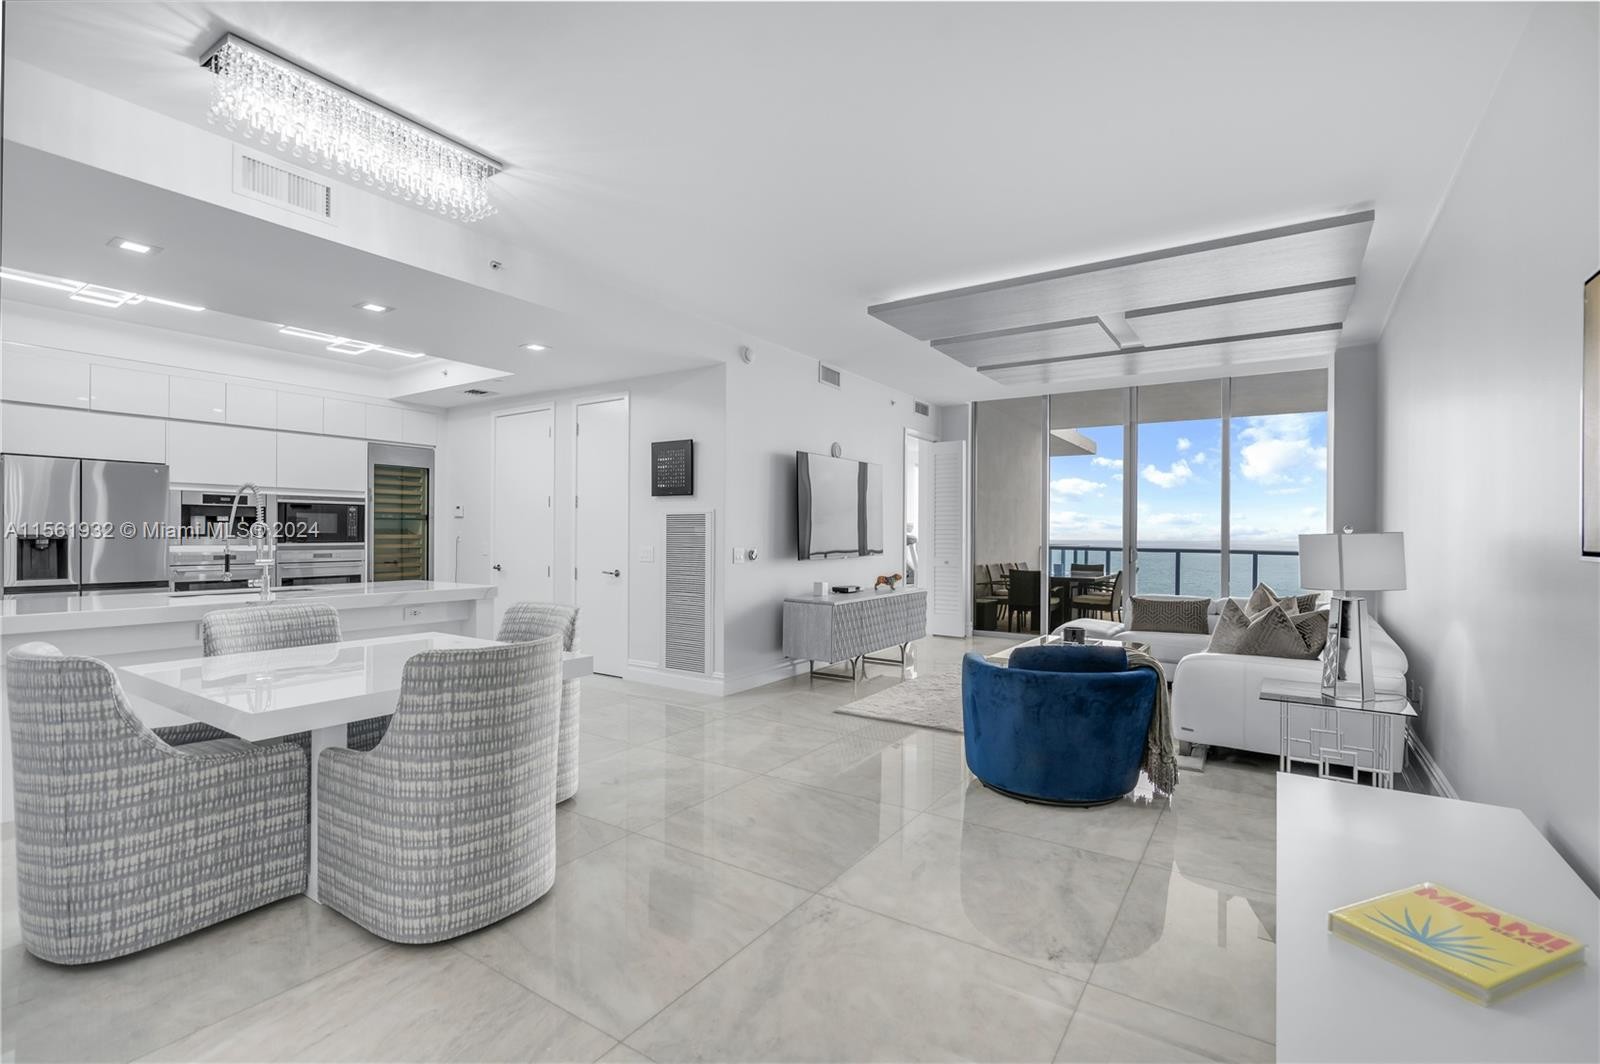 38. 9703 Collins Ave